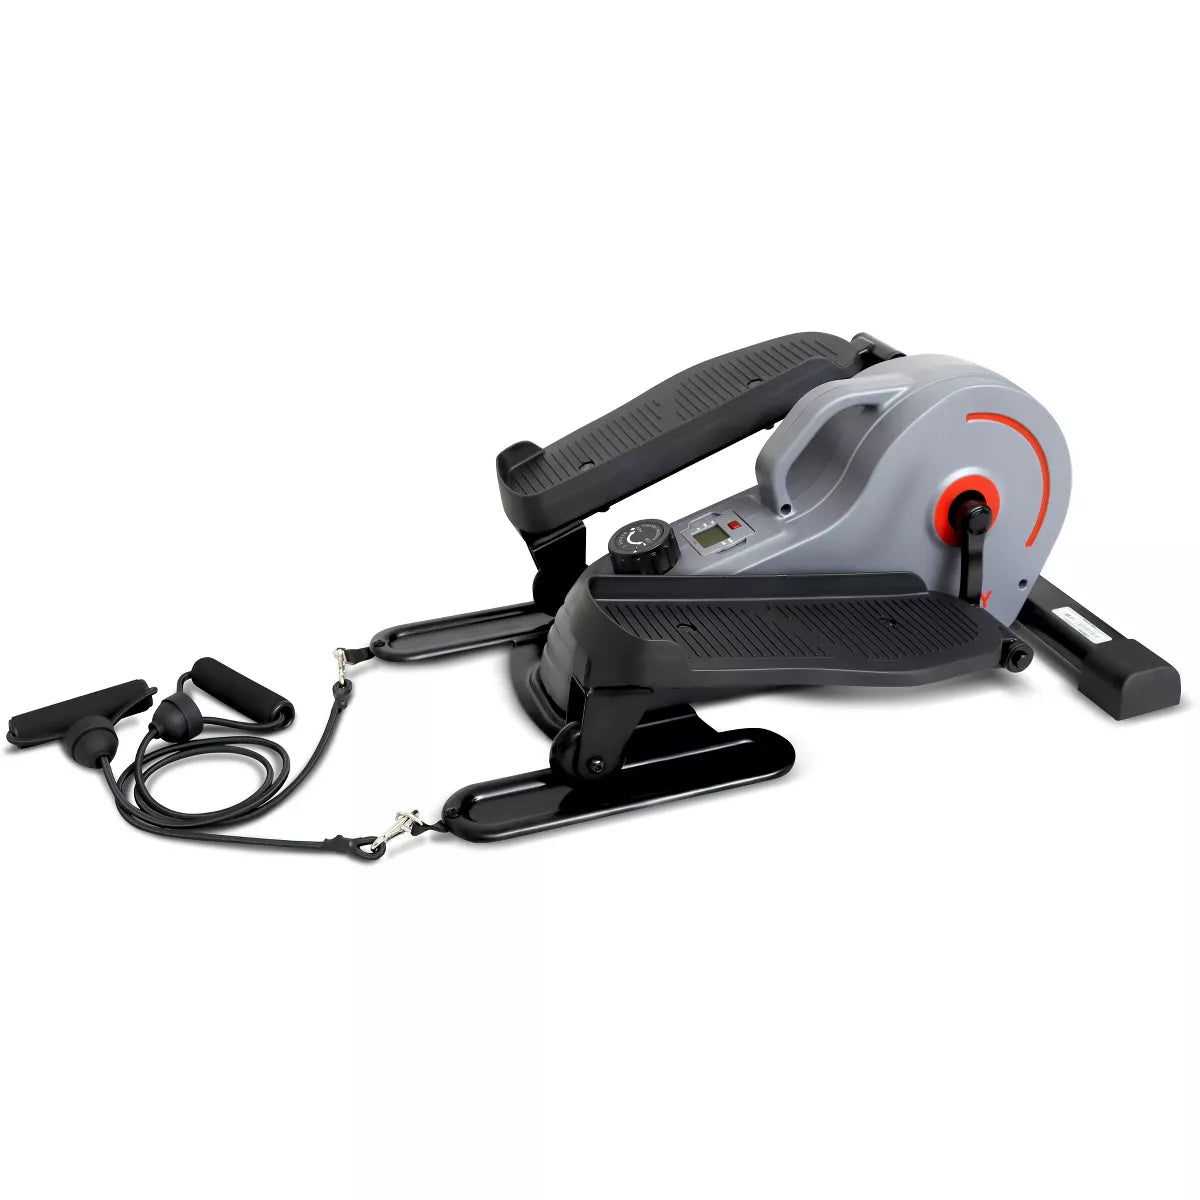 Sunny Health & Fitness Portable Stand Up Elliptical with Resistance Bands - Gray